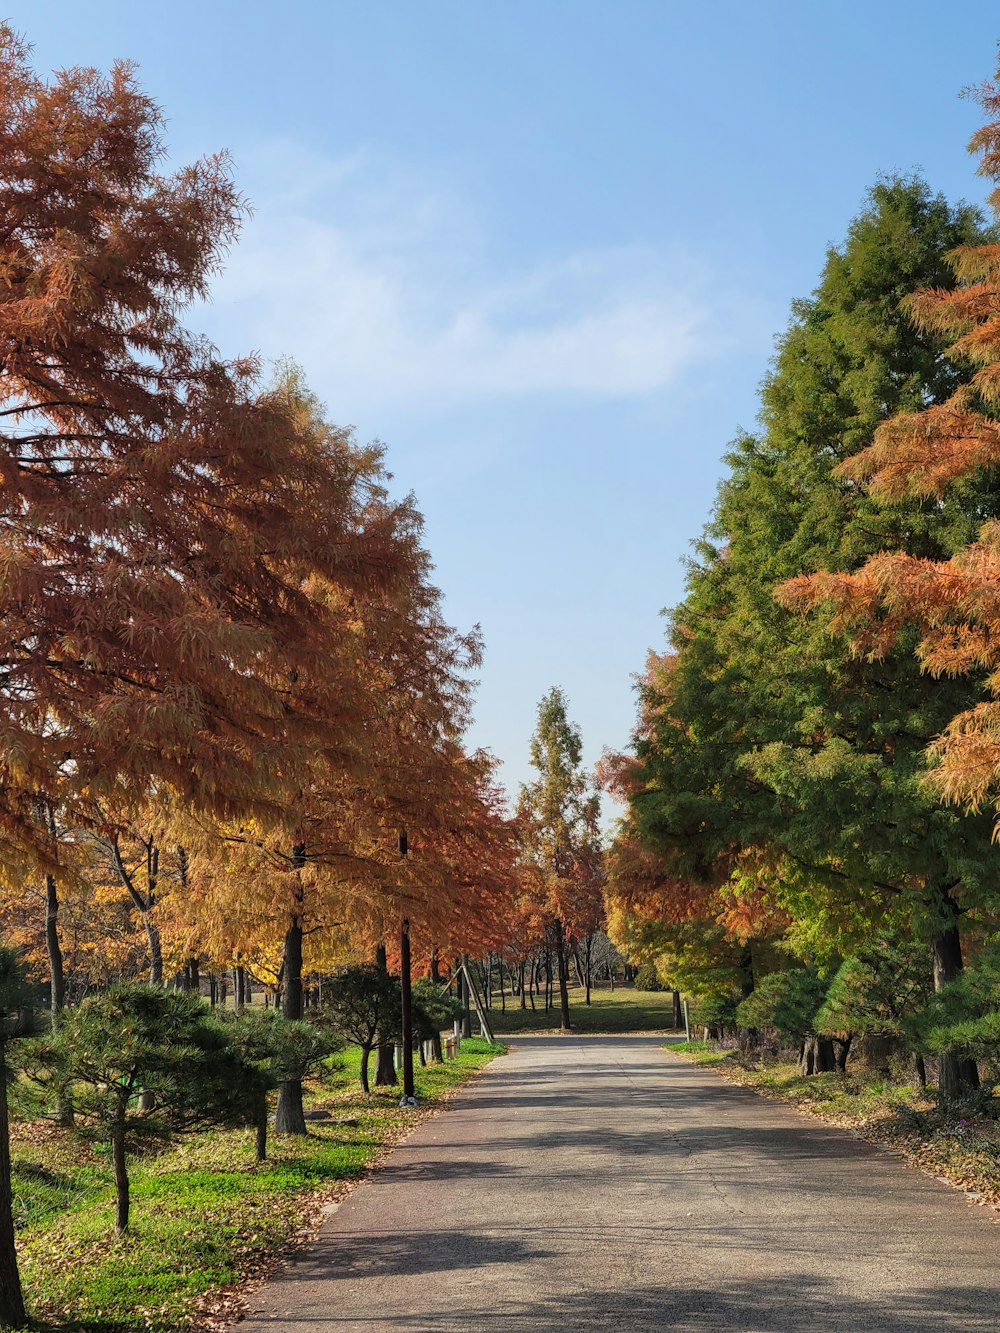 a paved road surrounded by trees with orange leaves